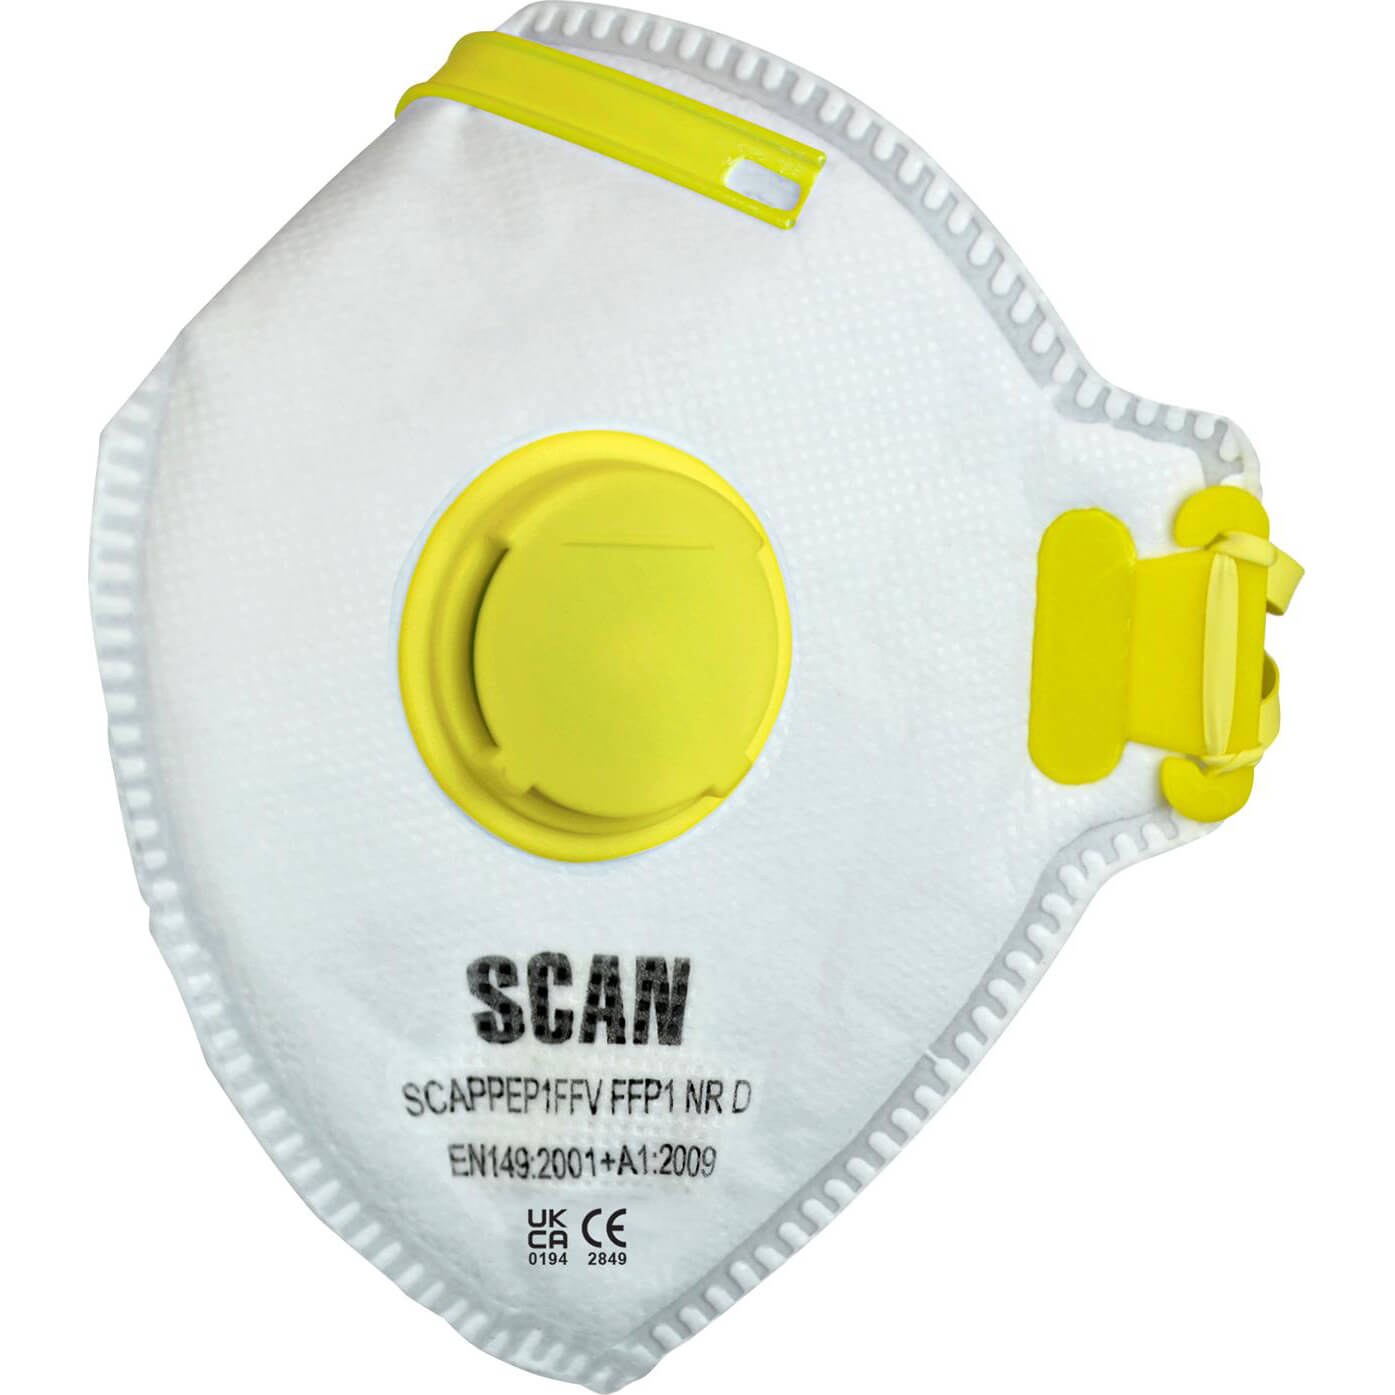 Photos - Safety Equipment SCAN FFP1 Fold Flat Valved Disposable Mask Pack of 20 SCAPPEP1FFVB 